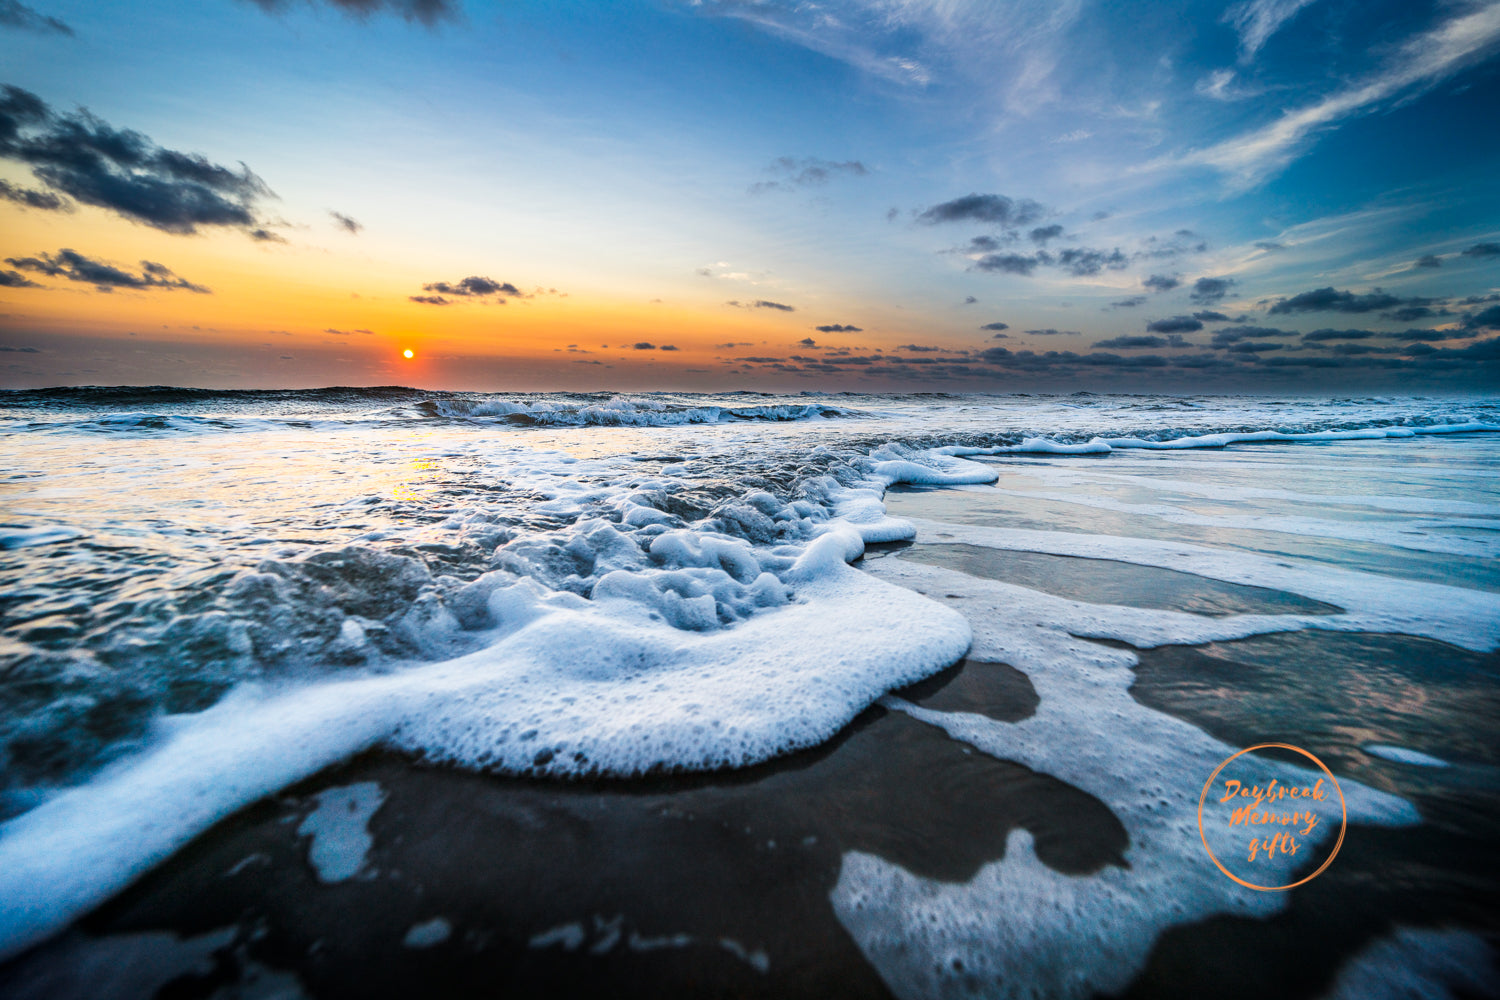 September 13, 2021 Sunrise over Jacksonville Beach. Wall art with a purpose. The perfect unique gift for special occasions like Newborn Baby gift, Wedding gift, Baptism gift or Client Gifts for their special occasions. Give them the Sunrise that corresponds to their special day. These high quality prints also make for stunning wall art that add a WOW Factor to room décor or office décor.